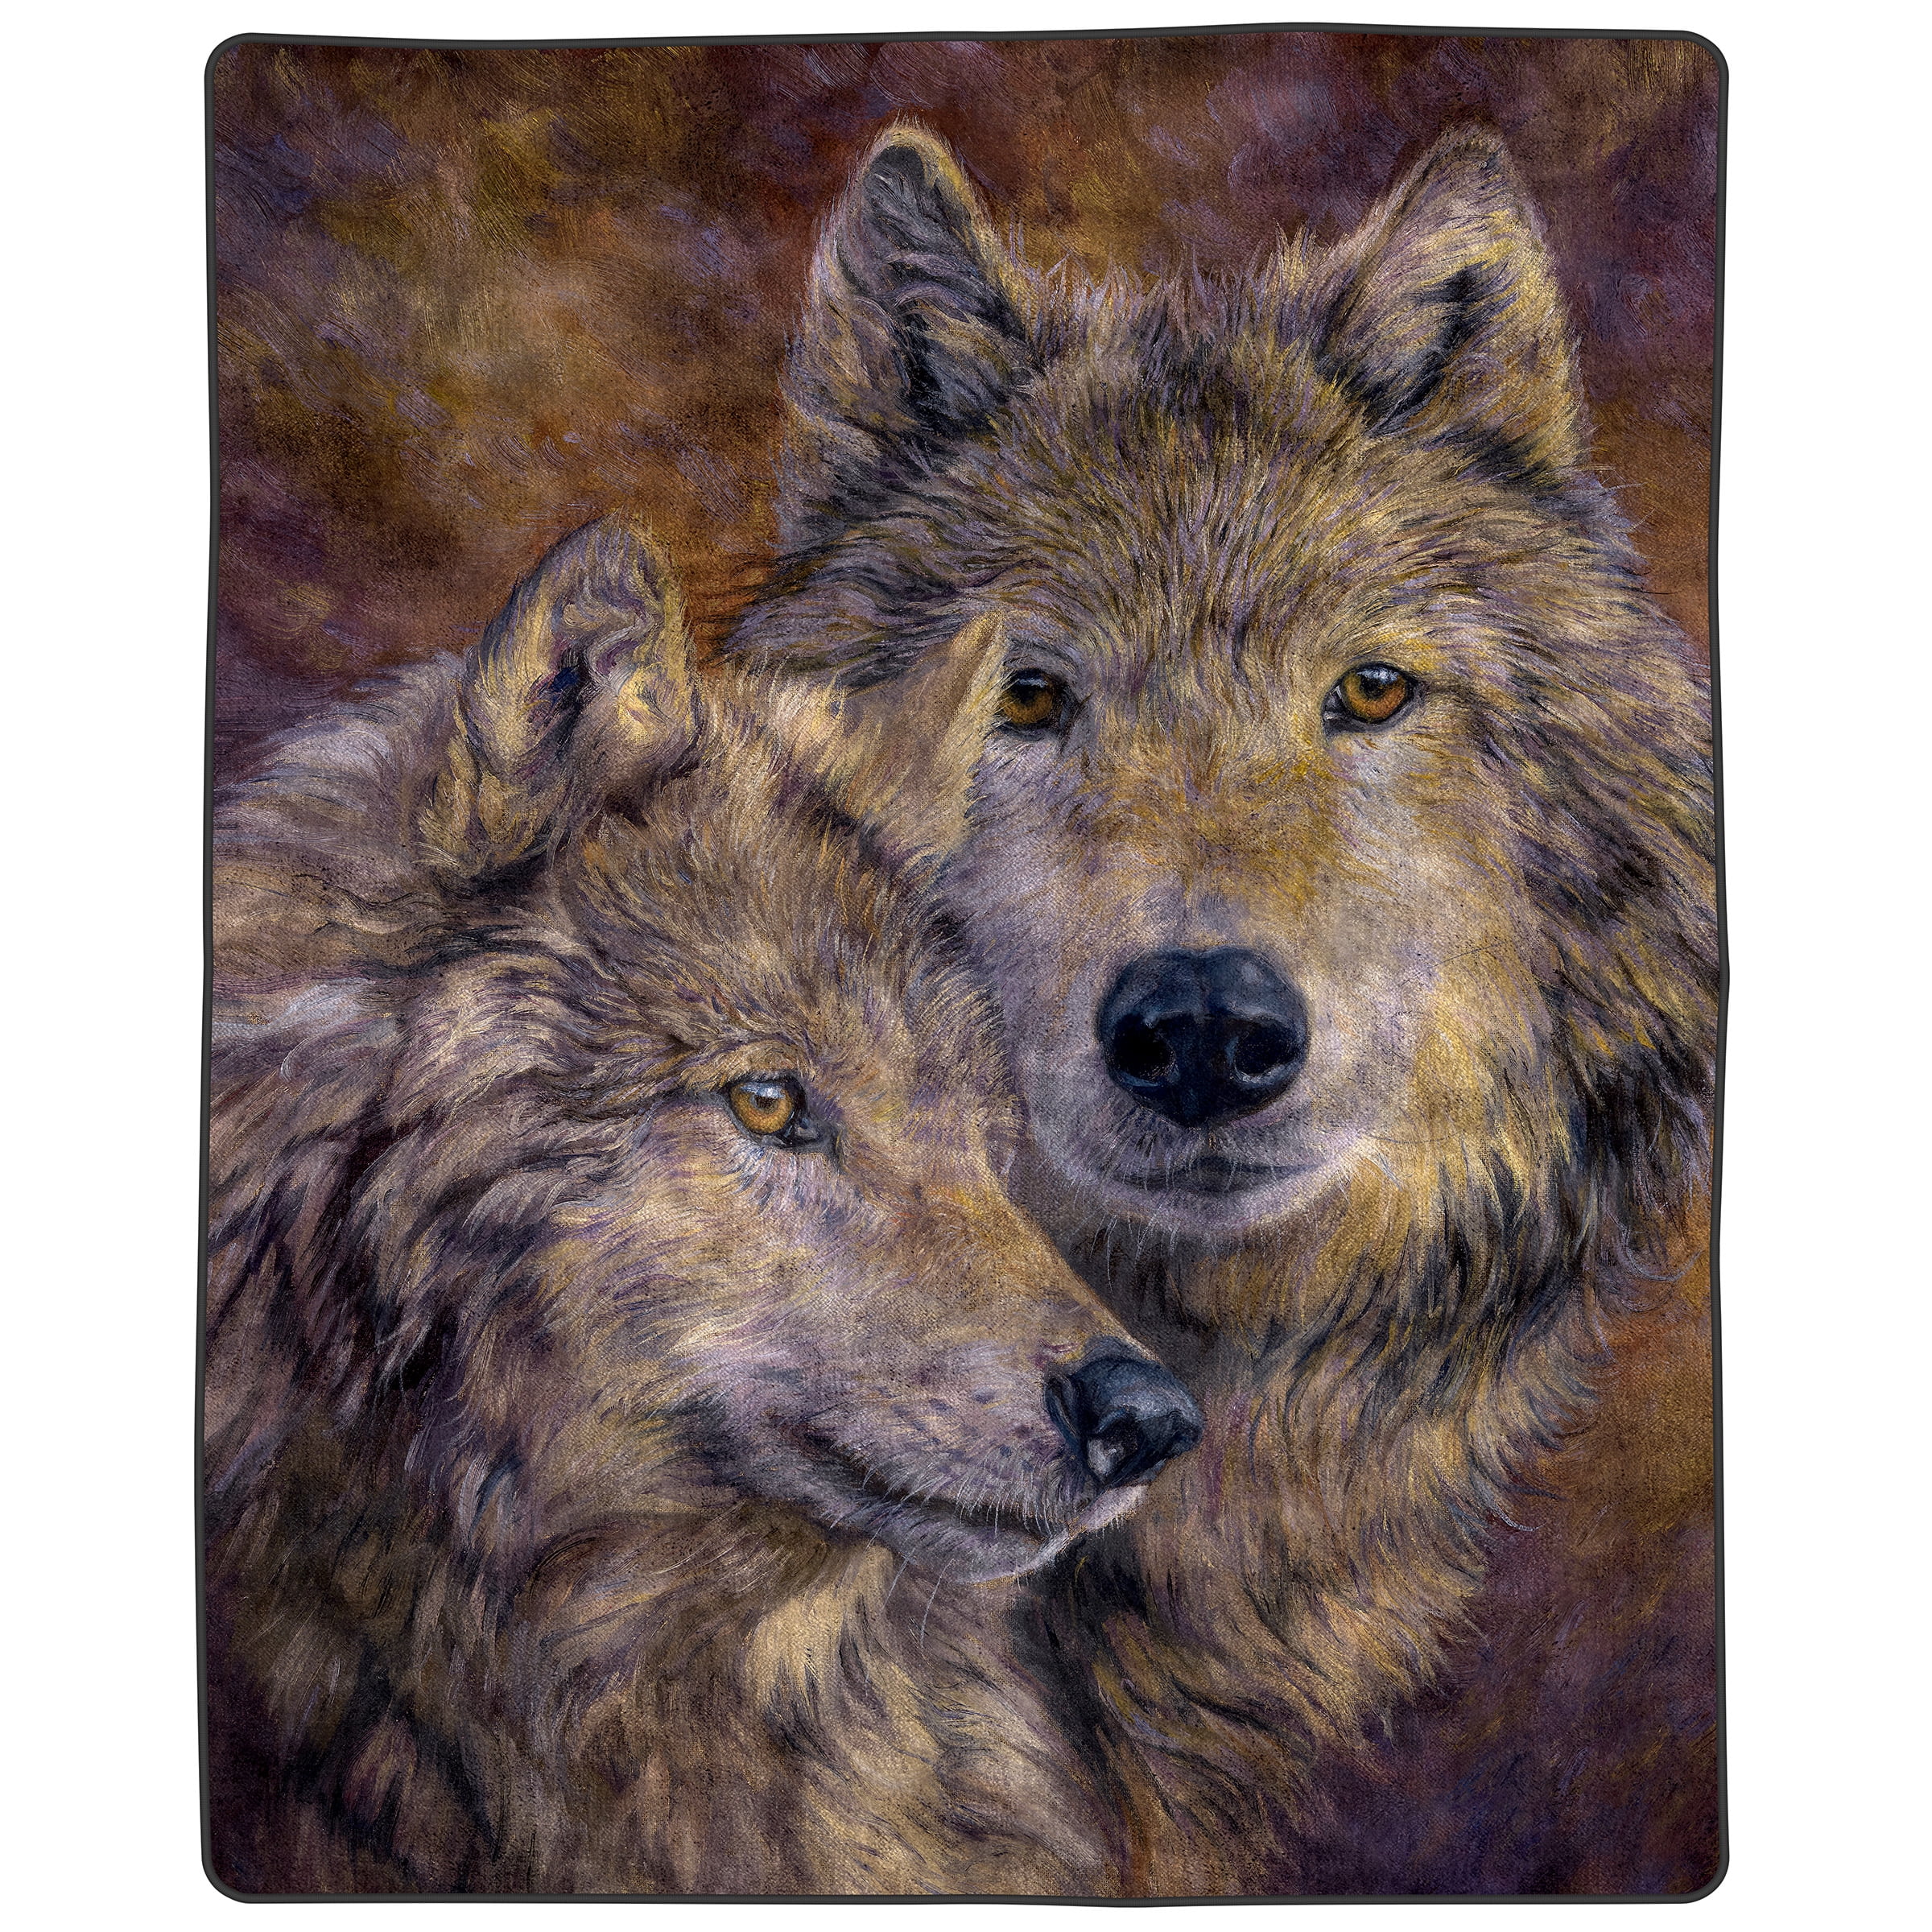 Details about   3D Star Wolf NAO019 Warm Plush Fleece Blanket Picnic Sofa Couch Quilt Bed Amy 